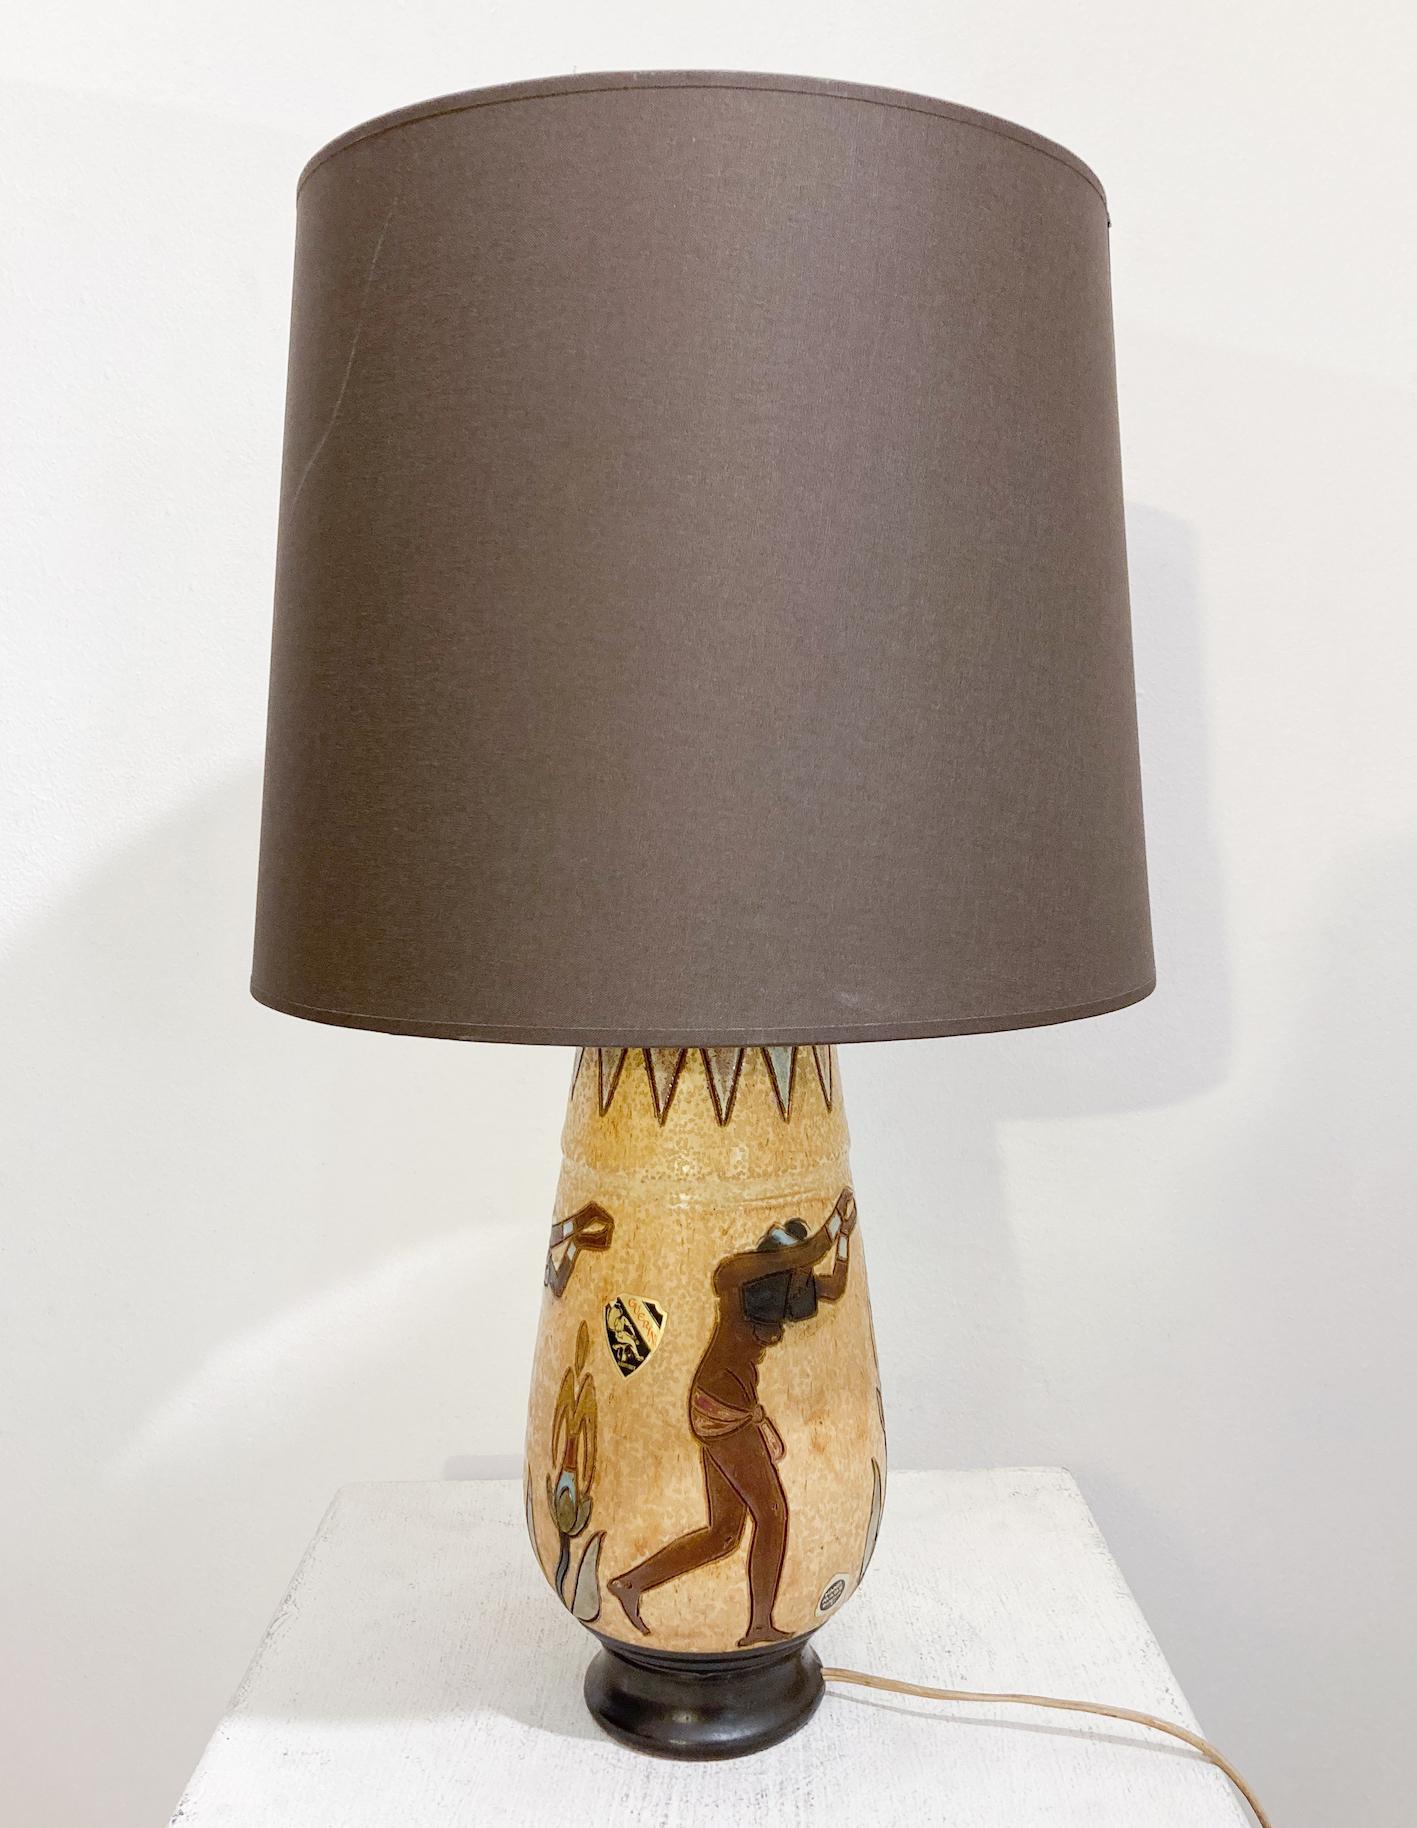 20th Century Mid-Century Modern Ceramic Table Lamp by Roger Guérin, Belgium For Sale